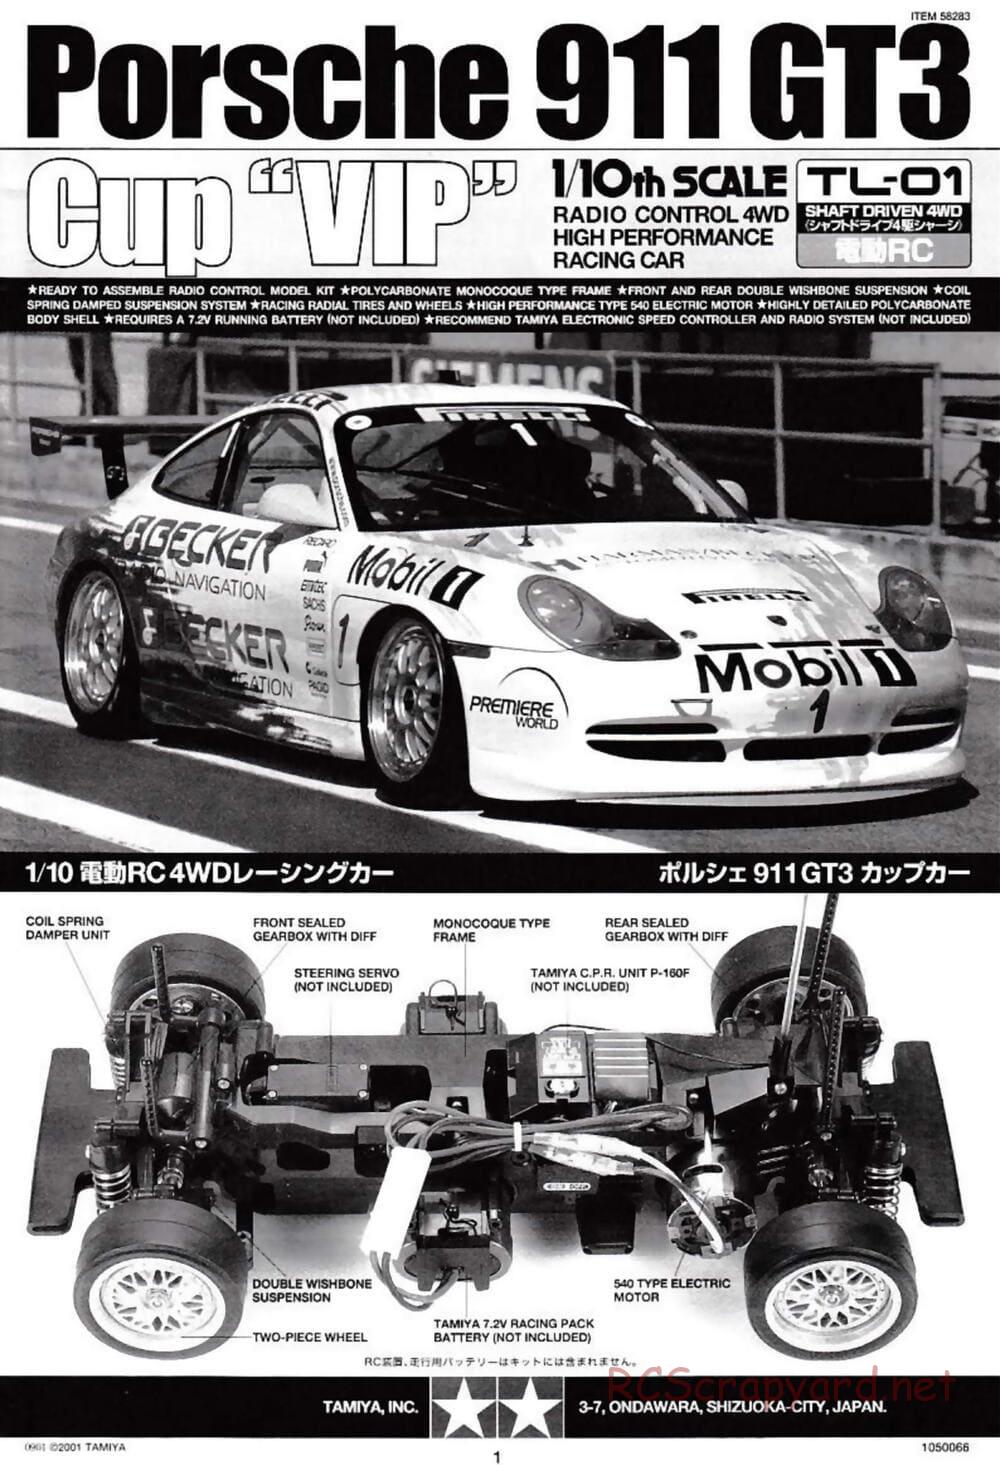 Tamiya - Porsche 911 GT3 Cup VIP - TL-01 Chassis - Manual - Page 1